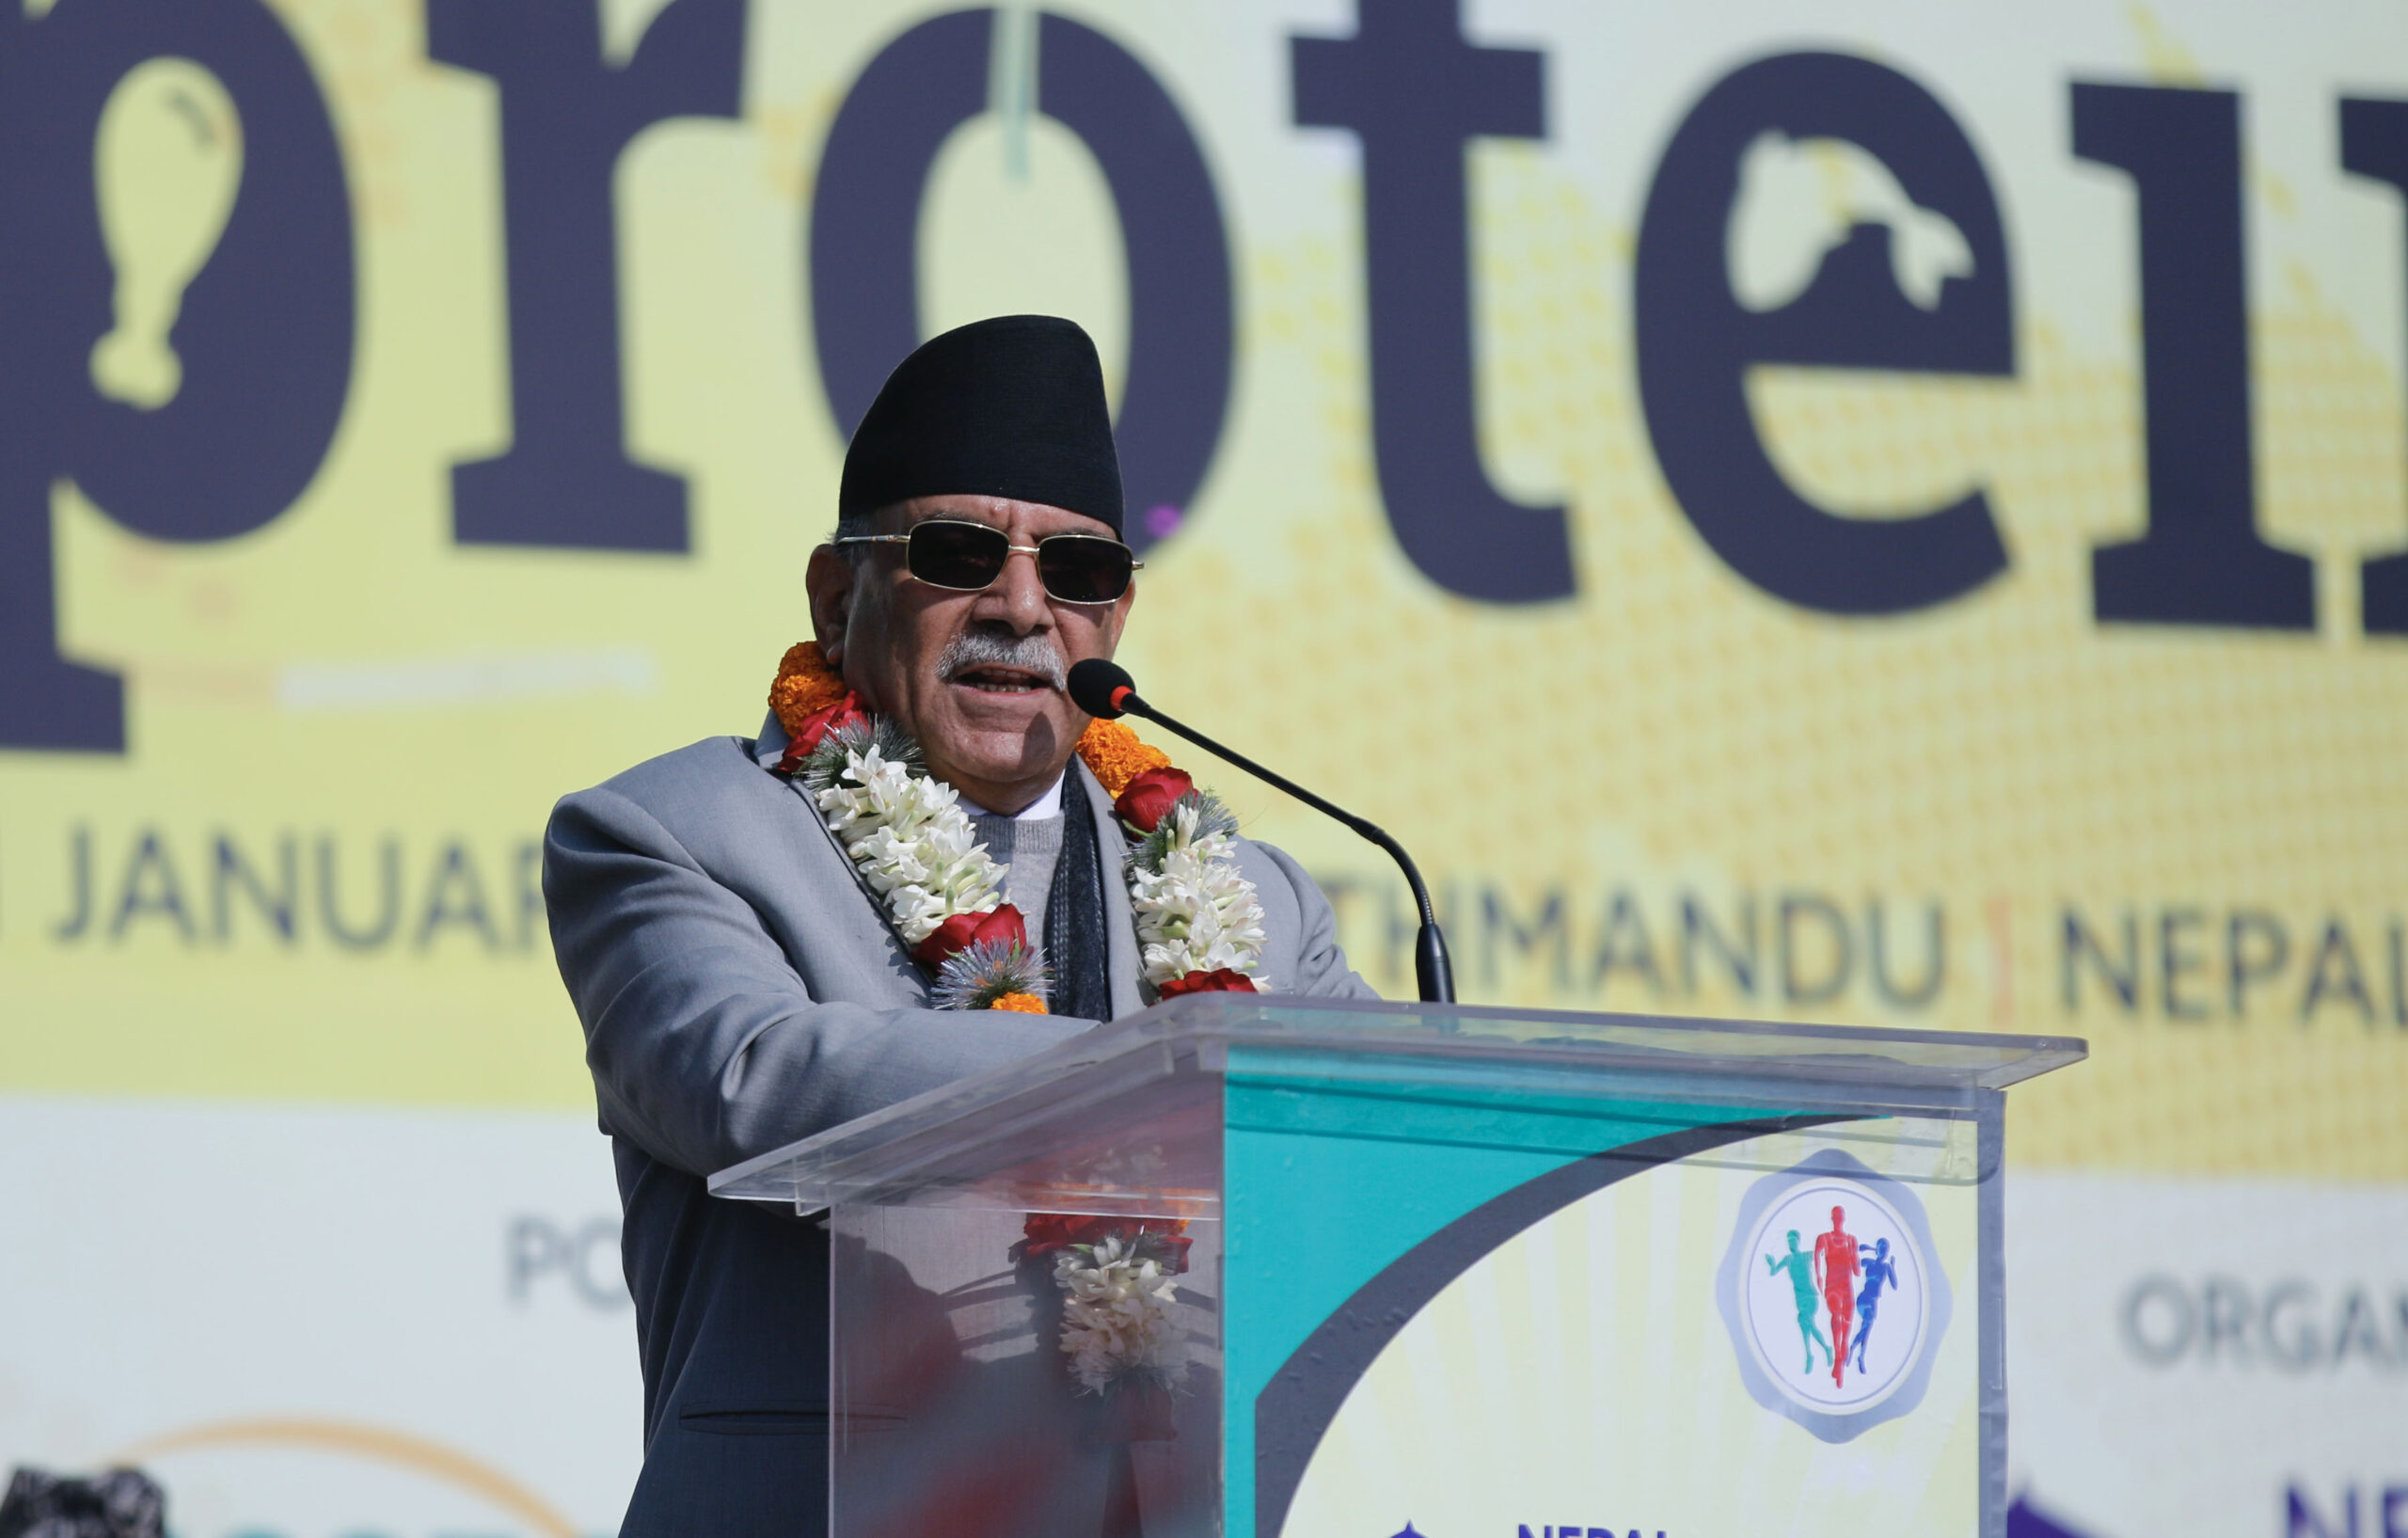 Govt is committed to ensure access to all sources of nutrition: PM Dahal